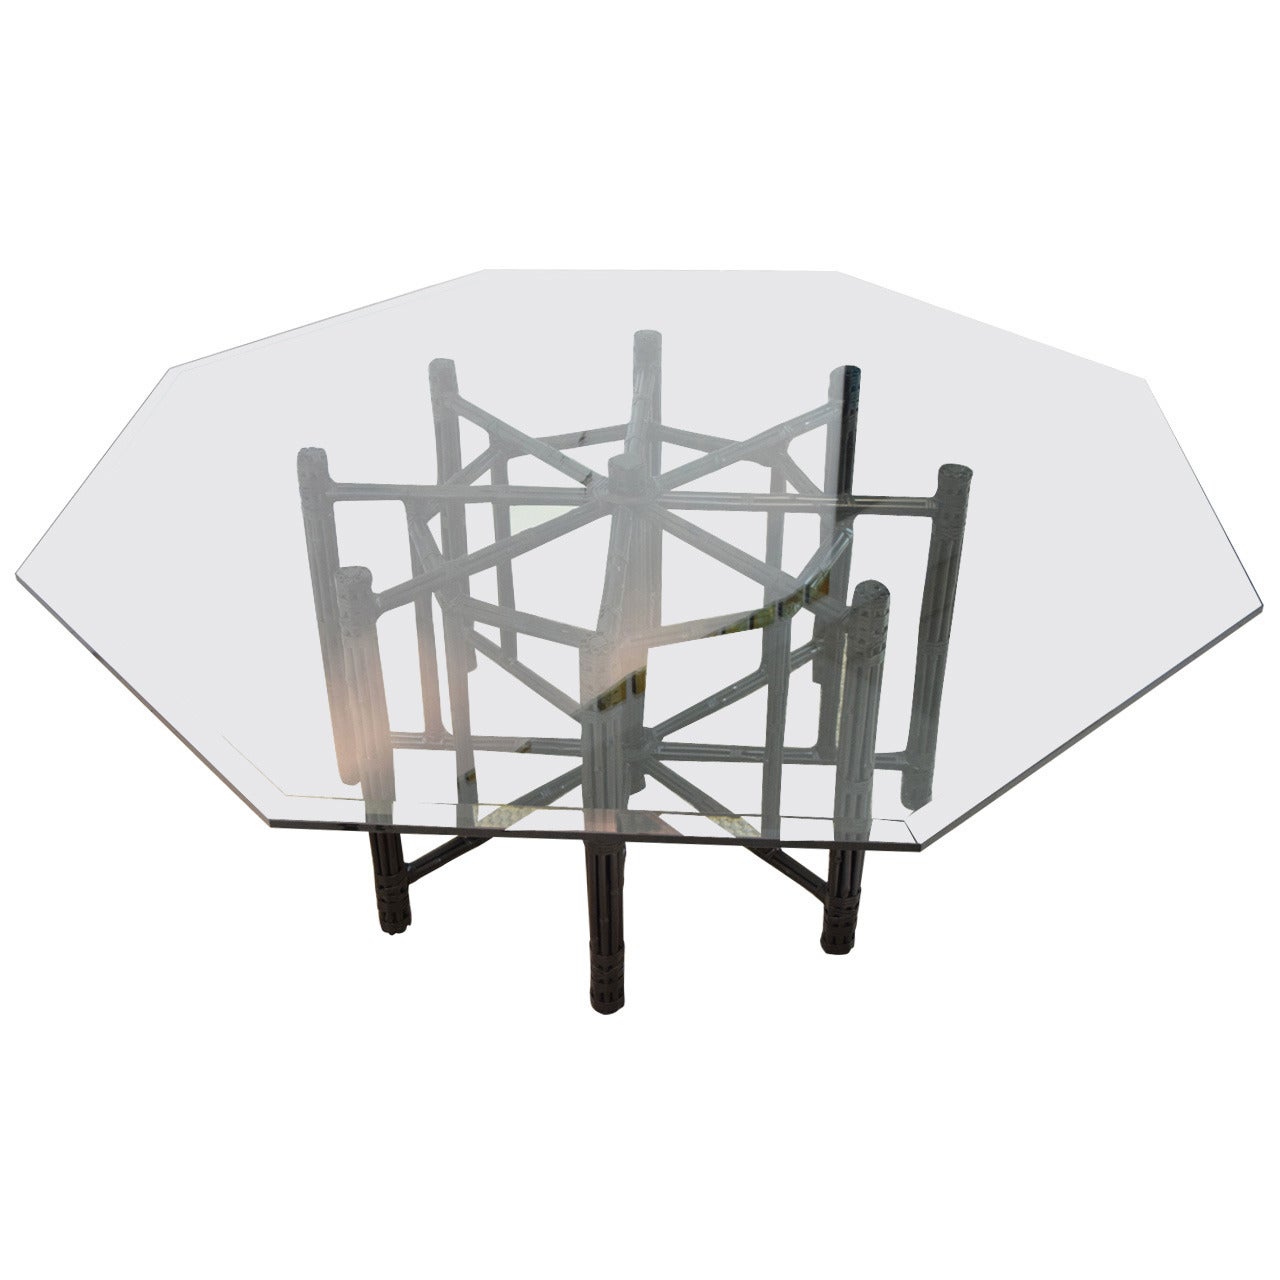 McGuire Bamboo Table with Octagon Glass Top